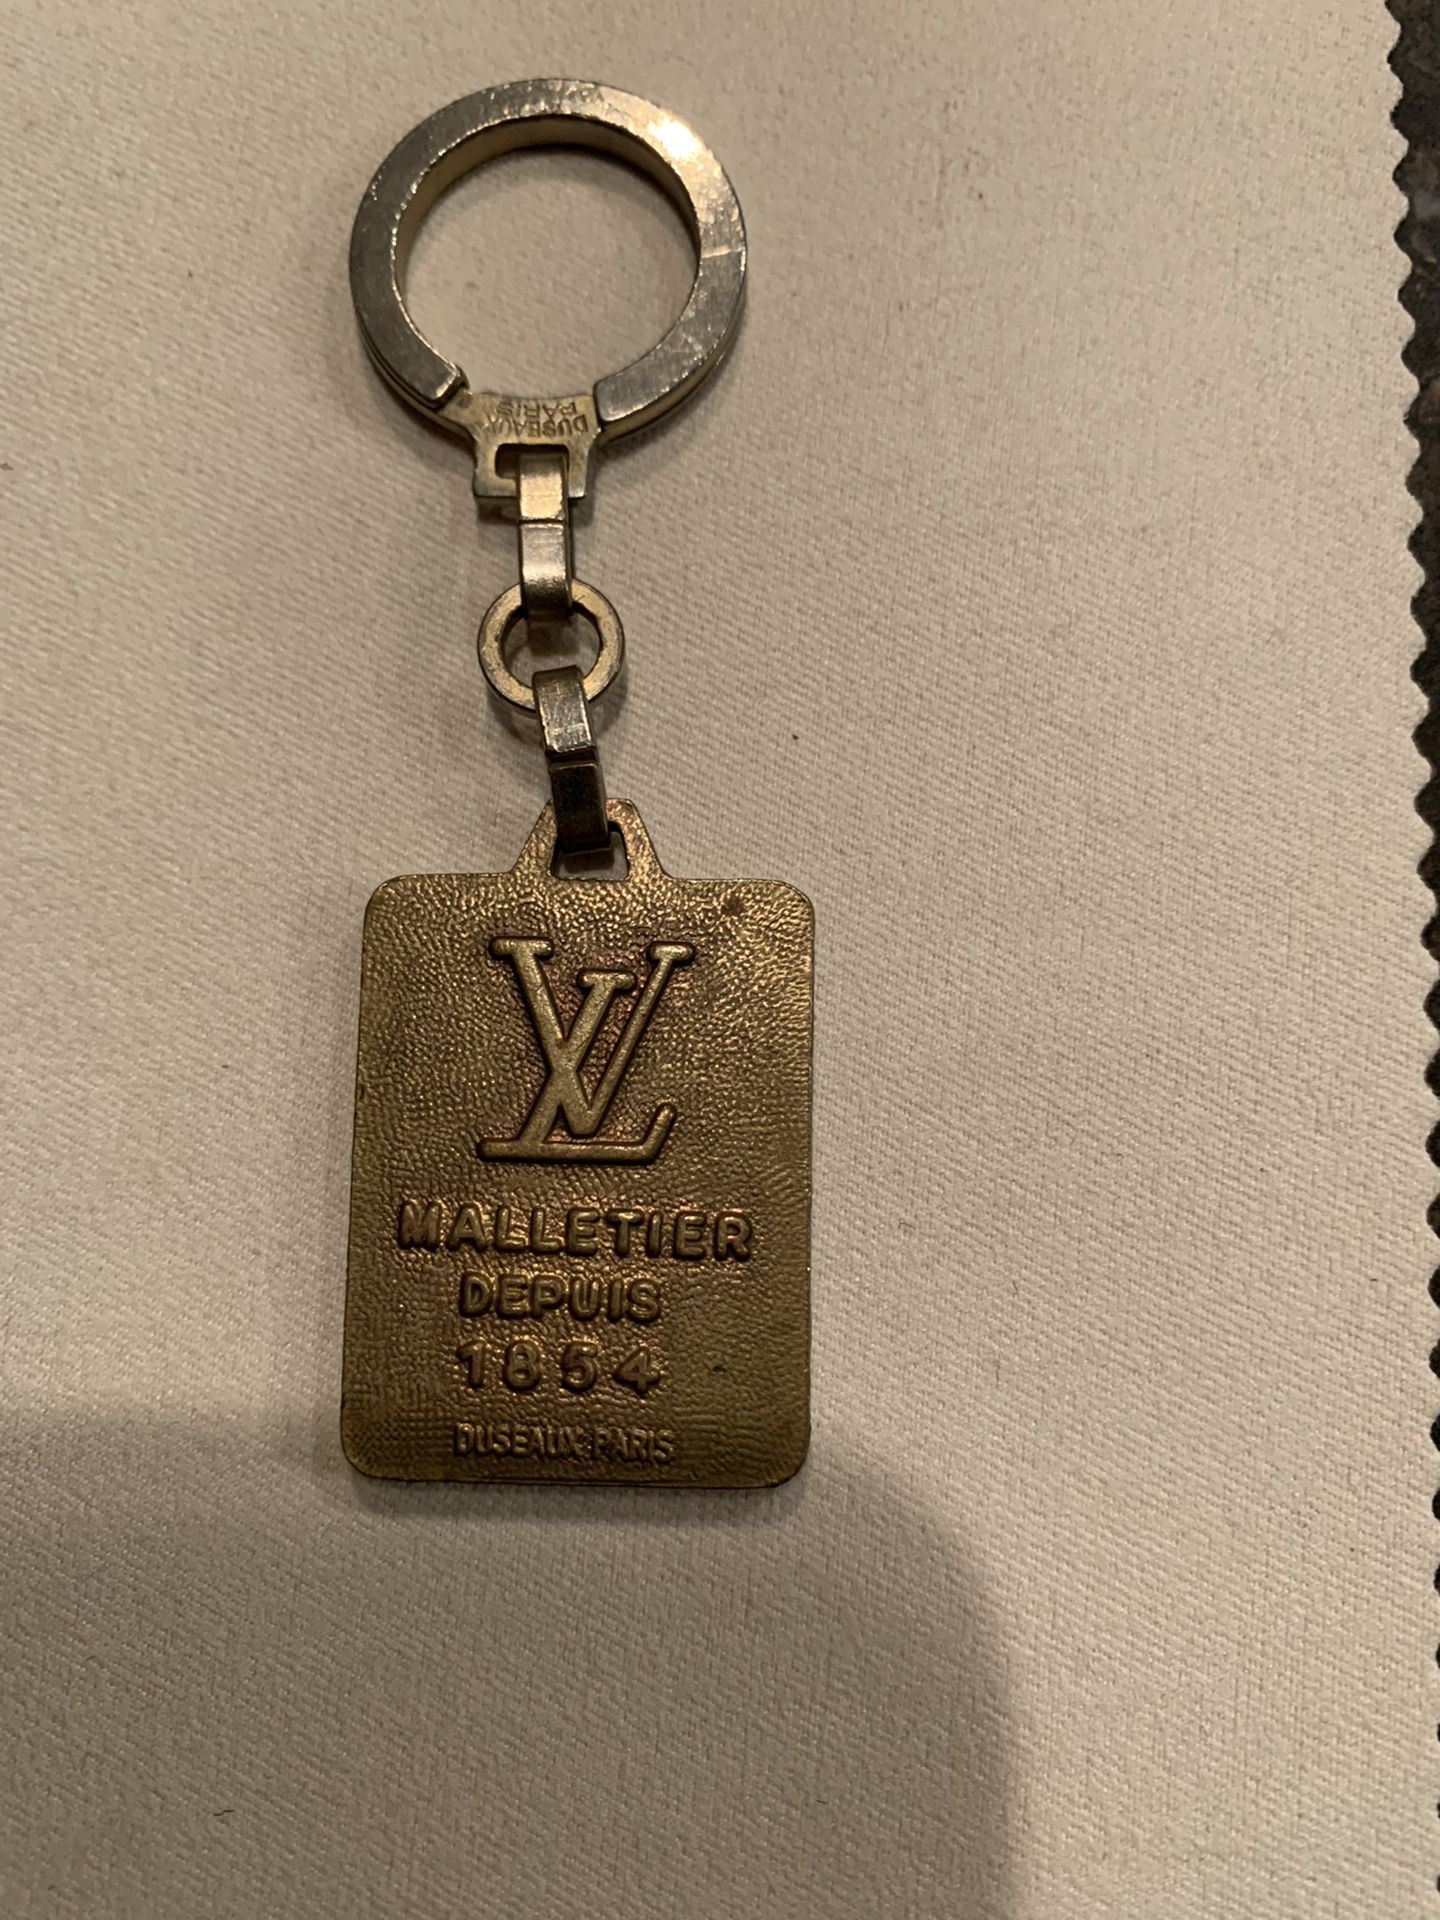 Vintage Louis Vuitton keychain from 1986